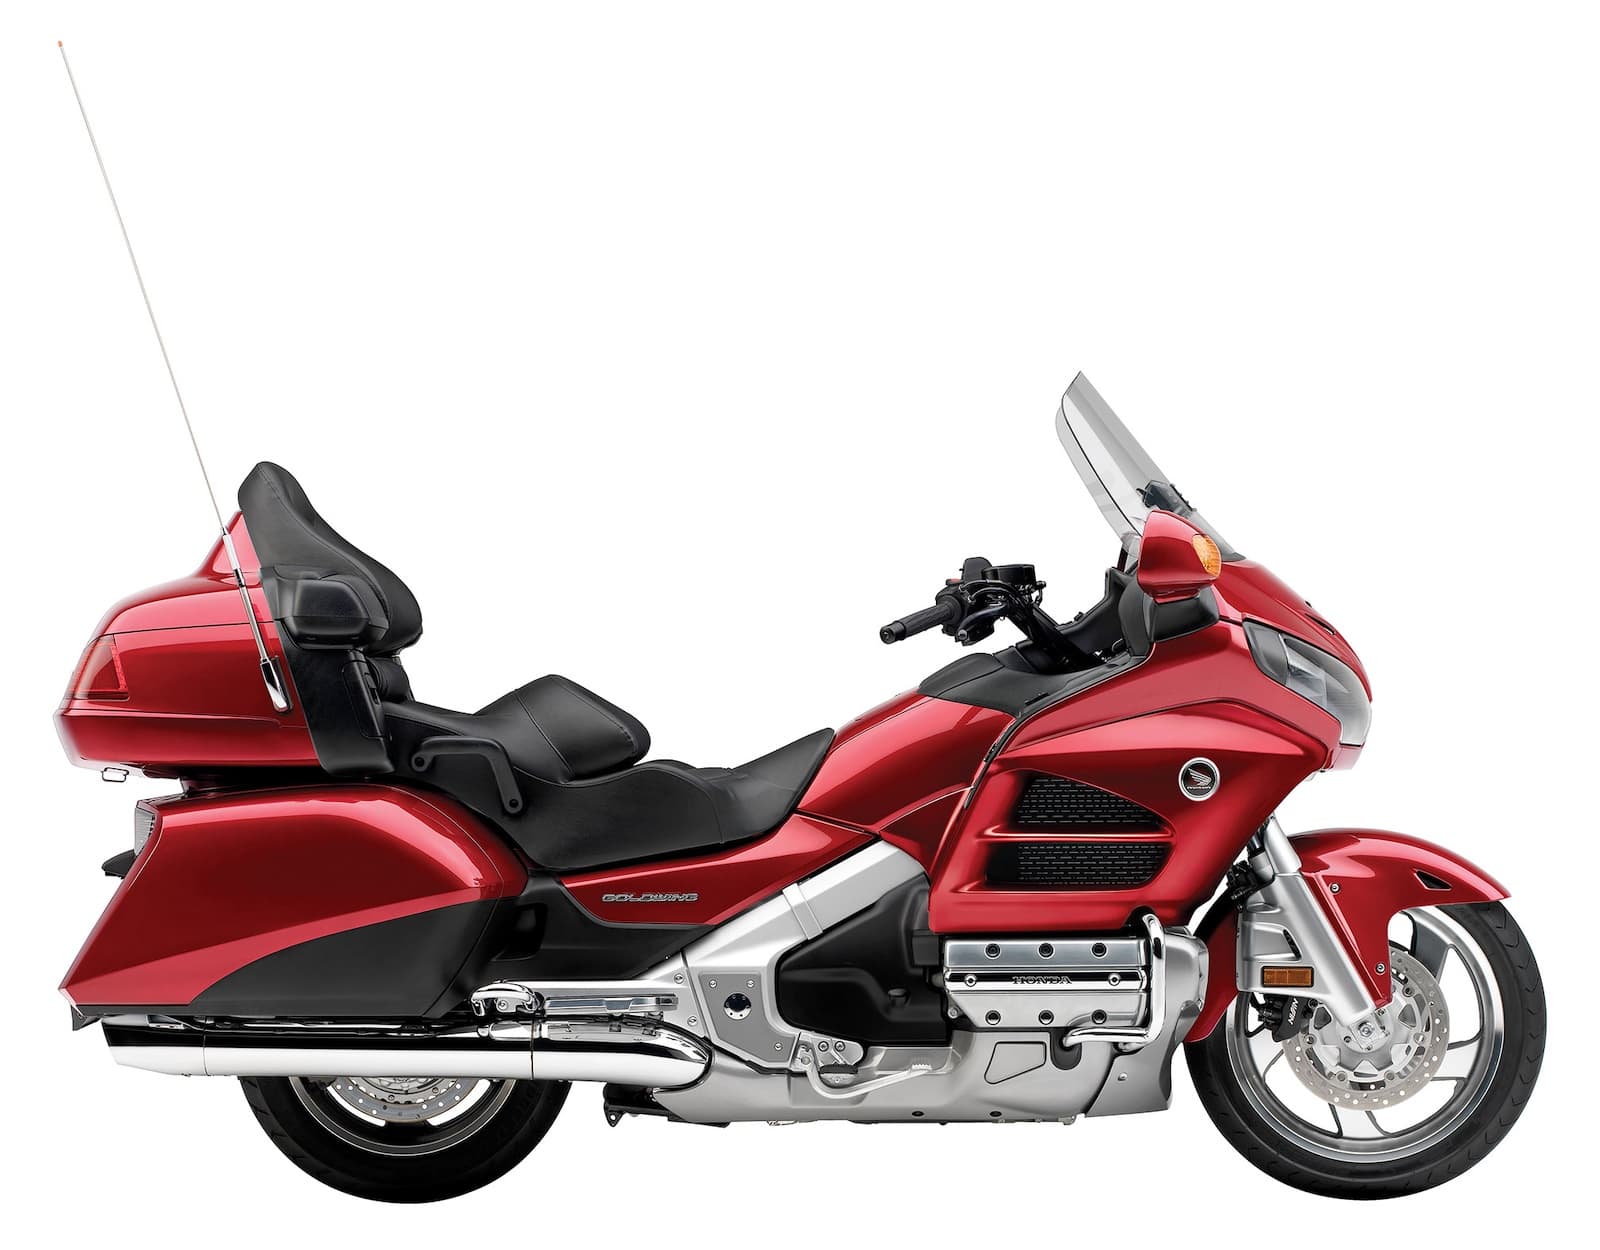 2014 Honda Gold Wing red and silver